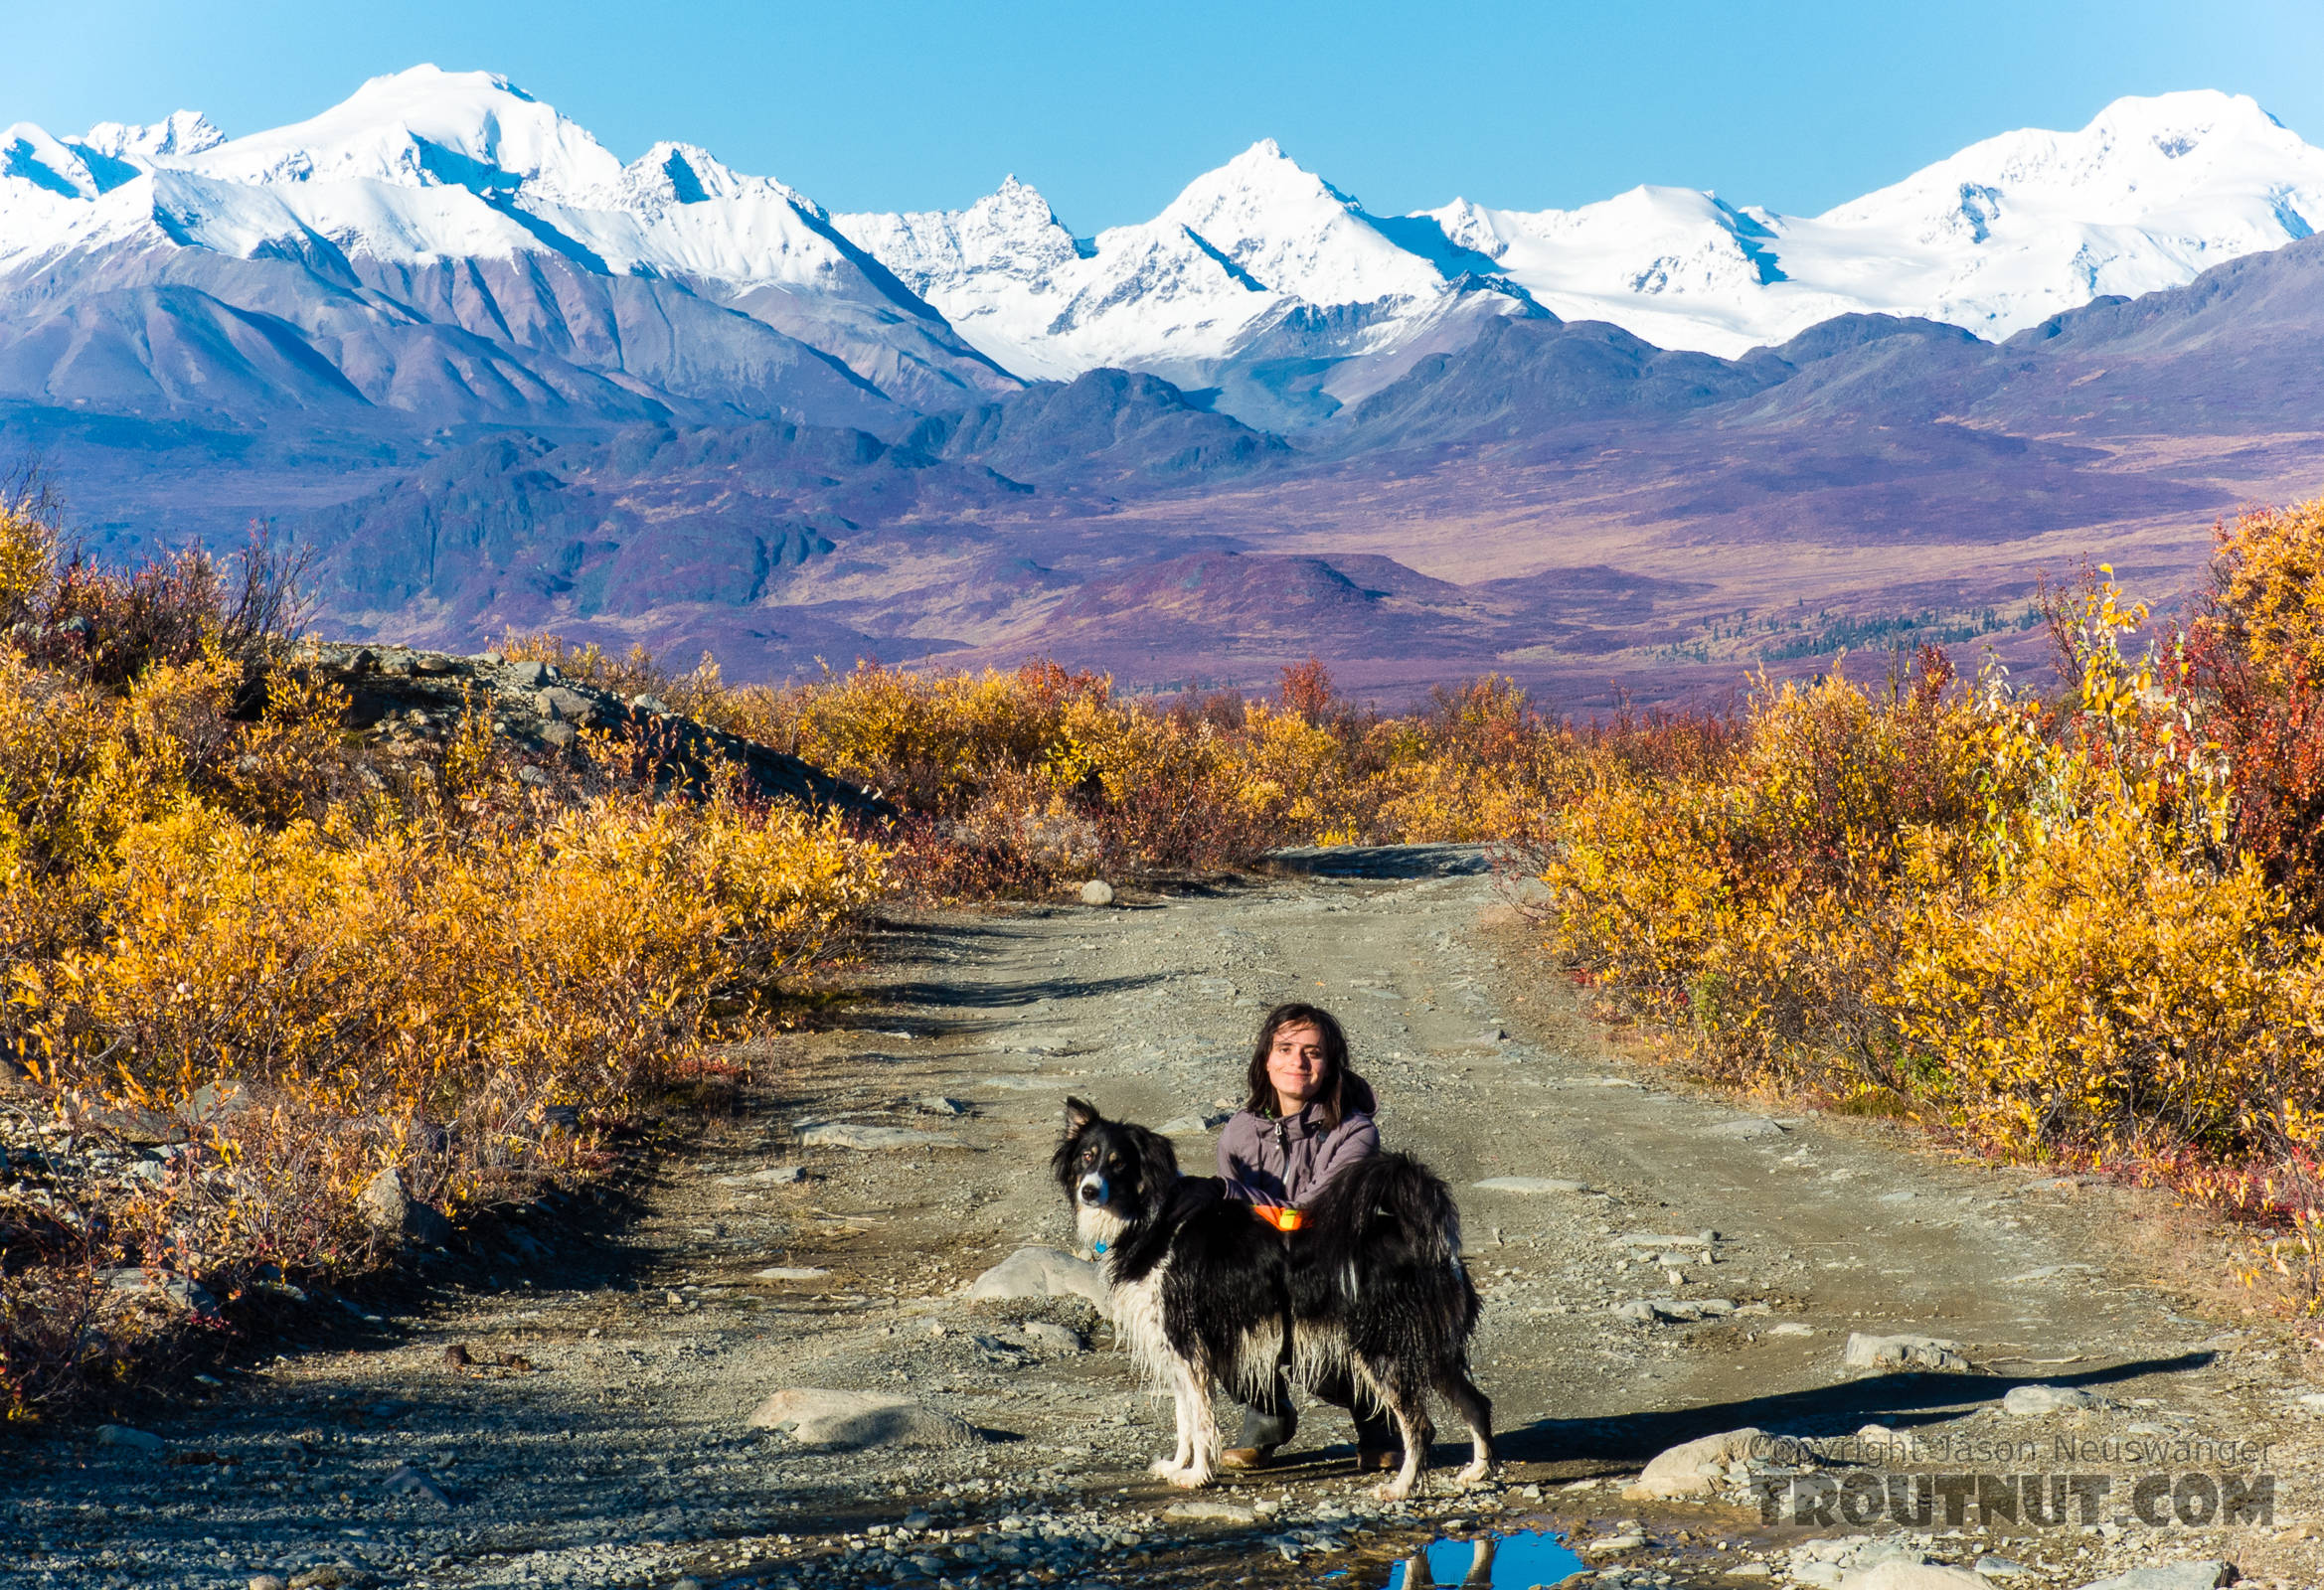 Lena and Taiga on the Maclaren River Trail. This trail heads north toward the Maclaren Glacier and West Fork of the Maclaren River, uphill on the west side of the Maclaren River. From the Maclaren River Trail in Alaska.